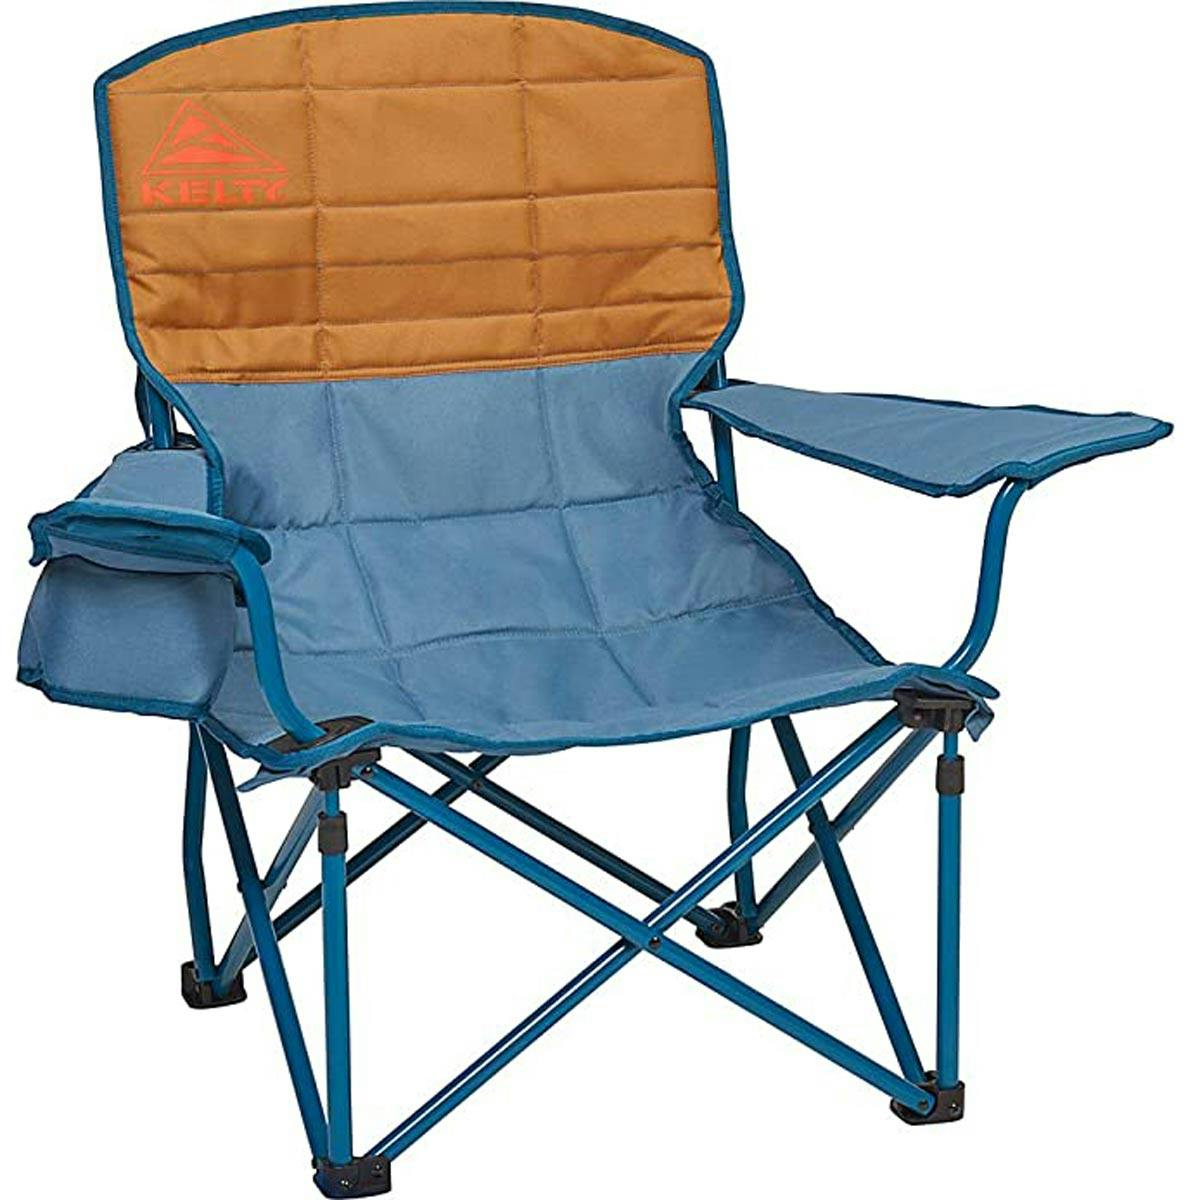 Kelty Lowdown Chair - Tapestry/Canyon Brown